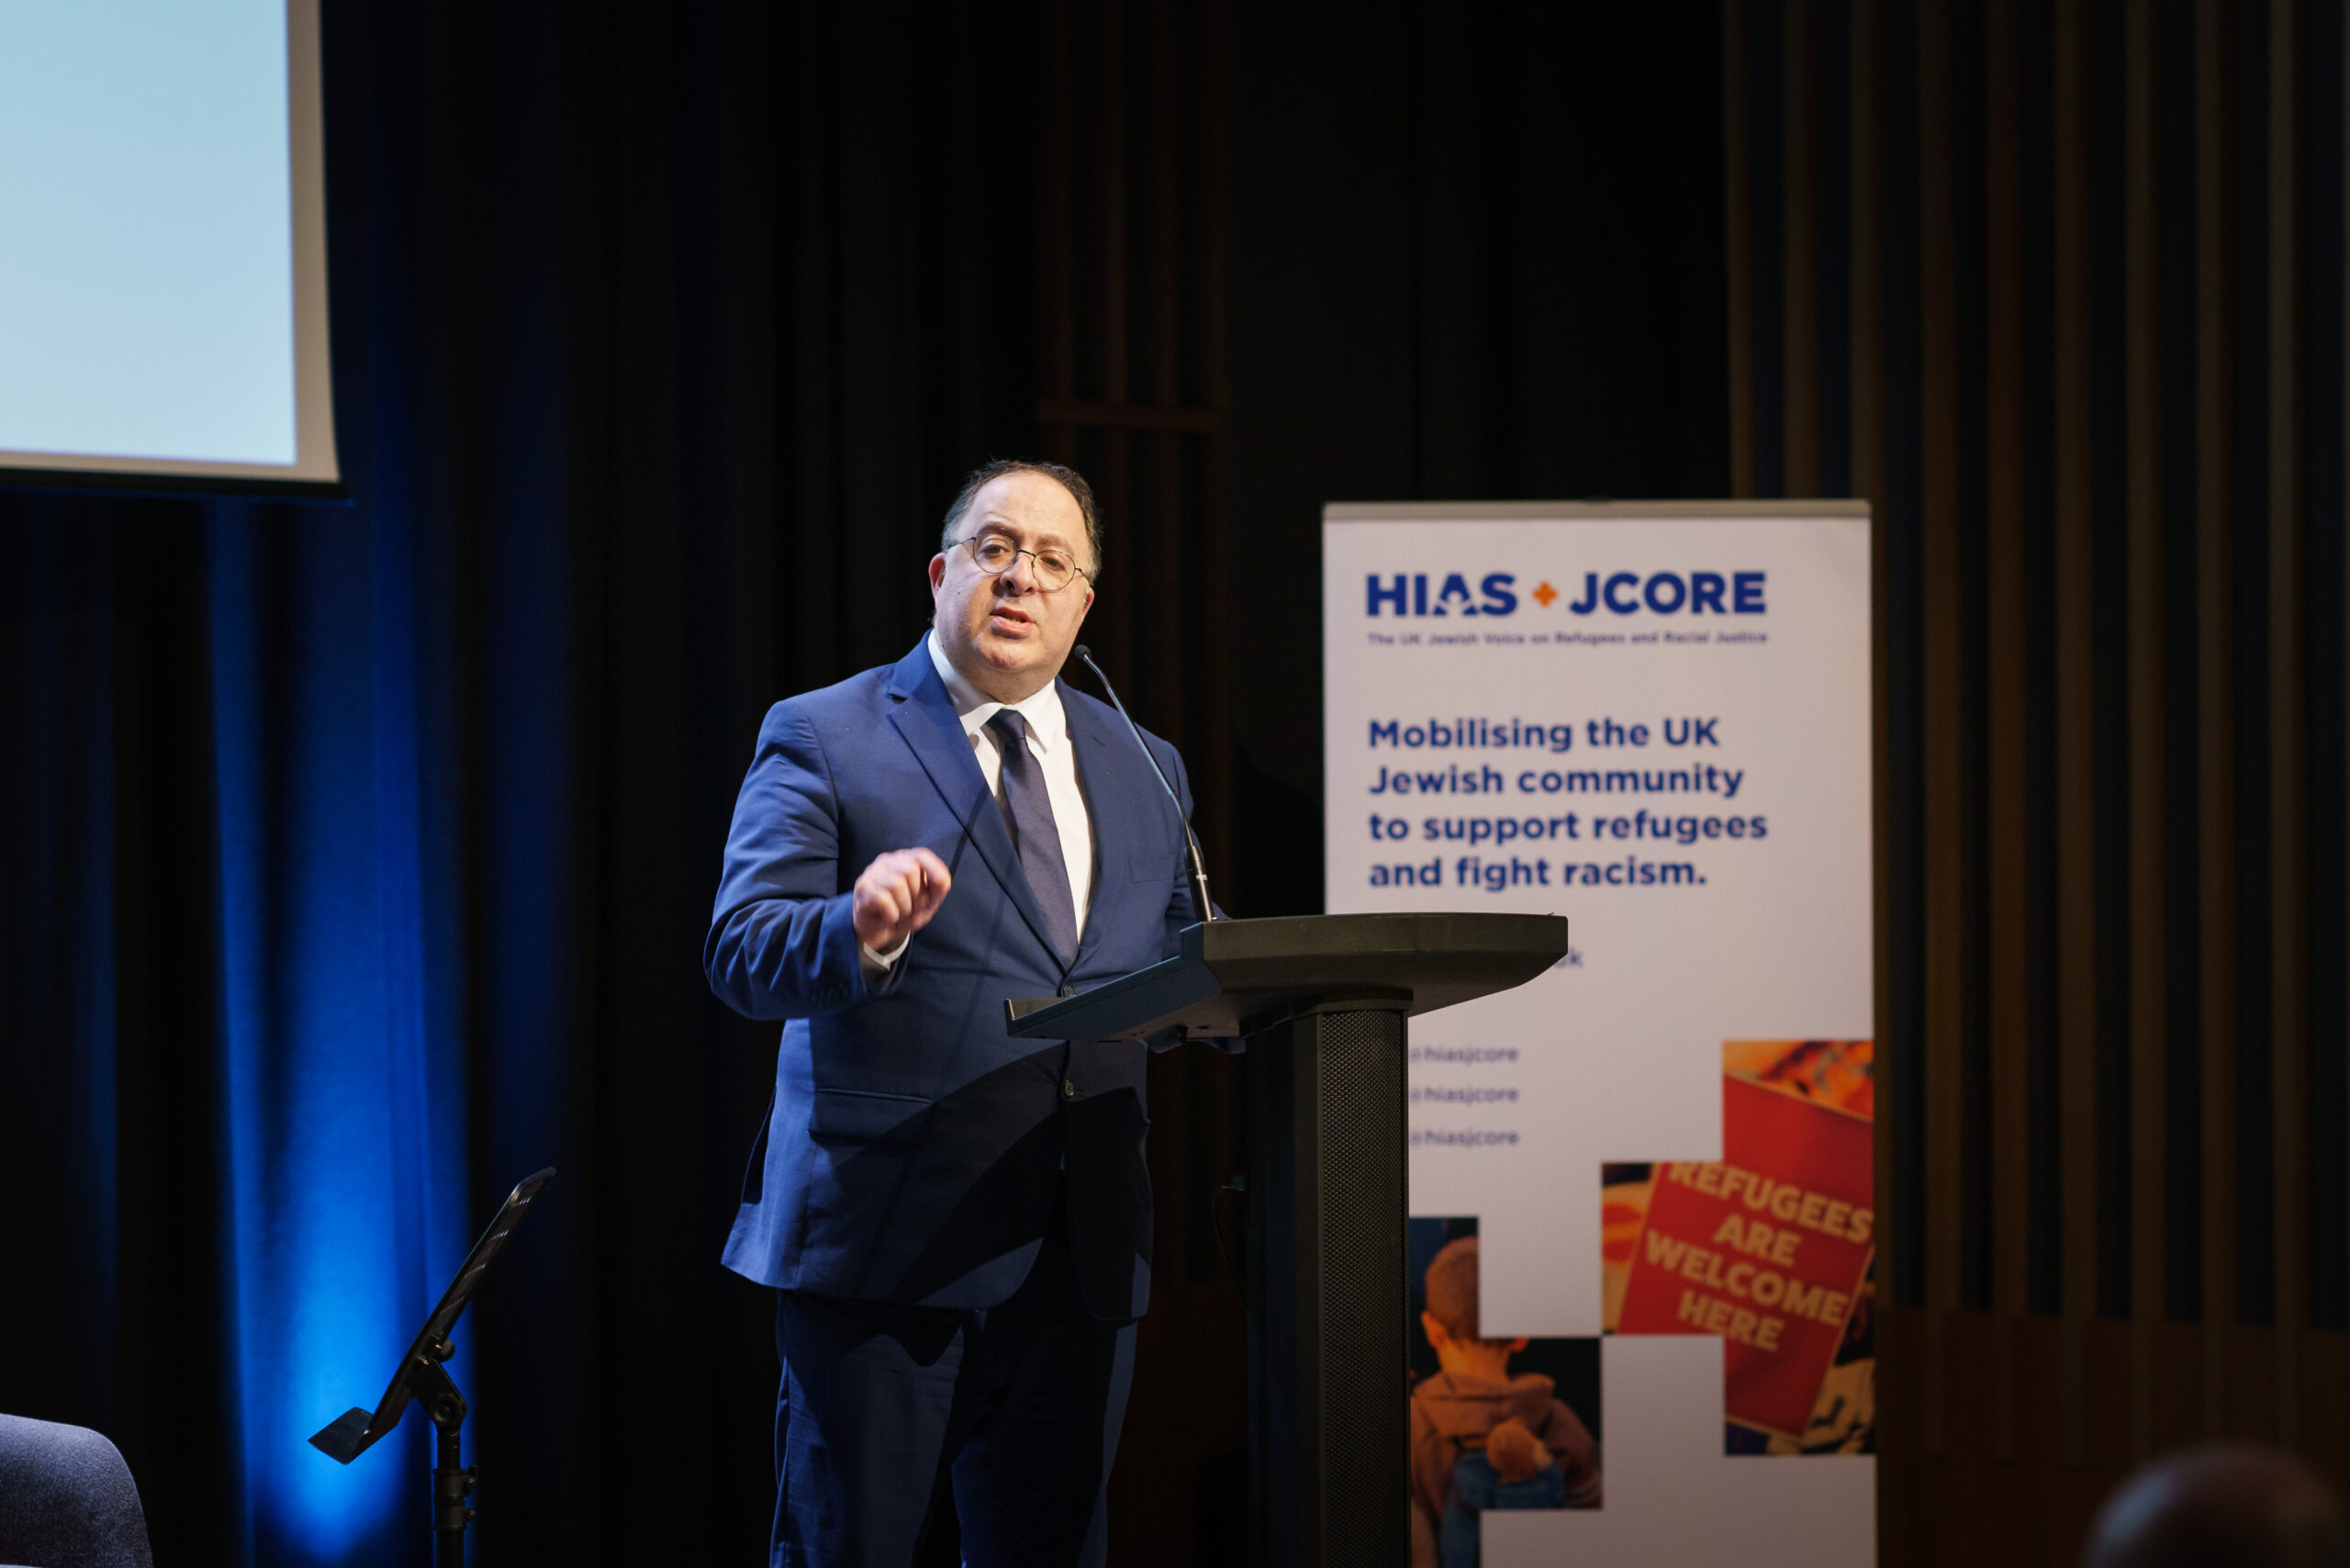 HIAS+JCORE Celebrates Launch with JW3 Event and Global Livestream